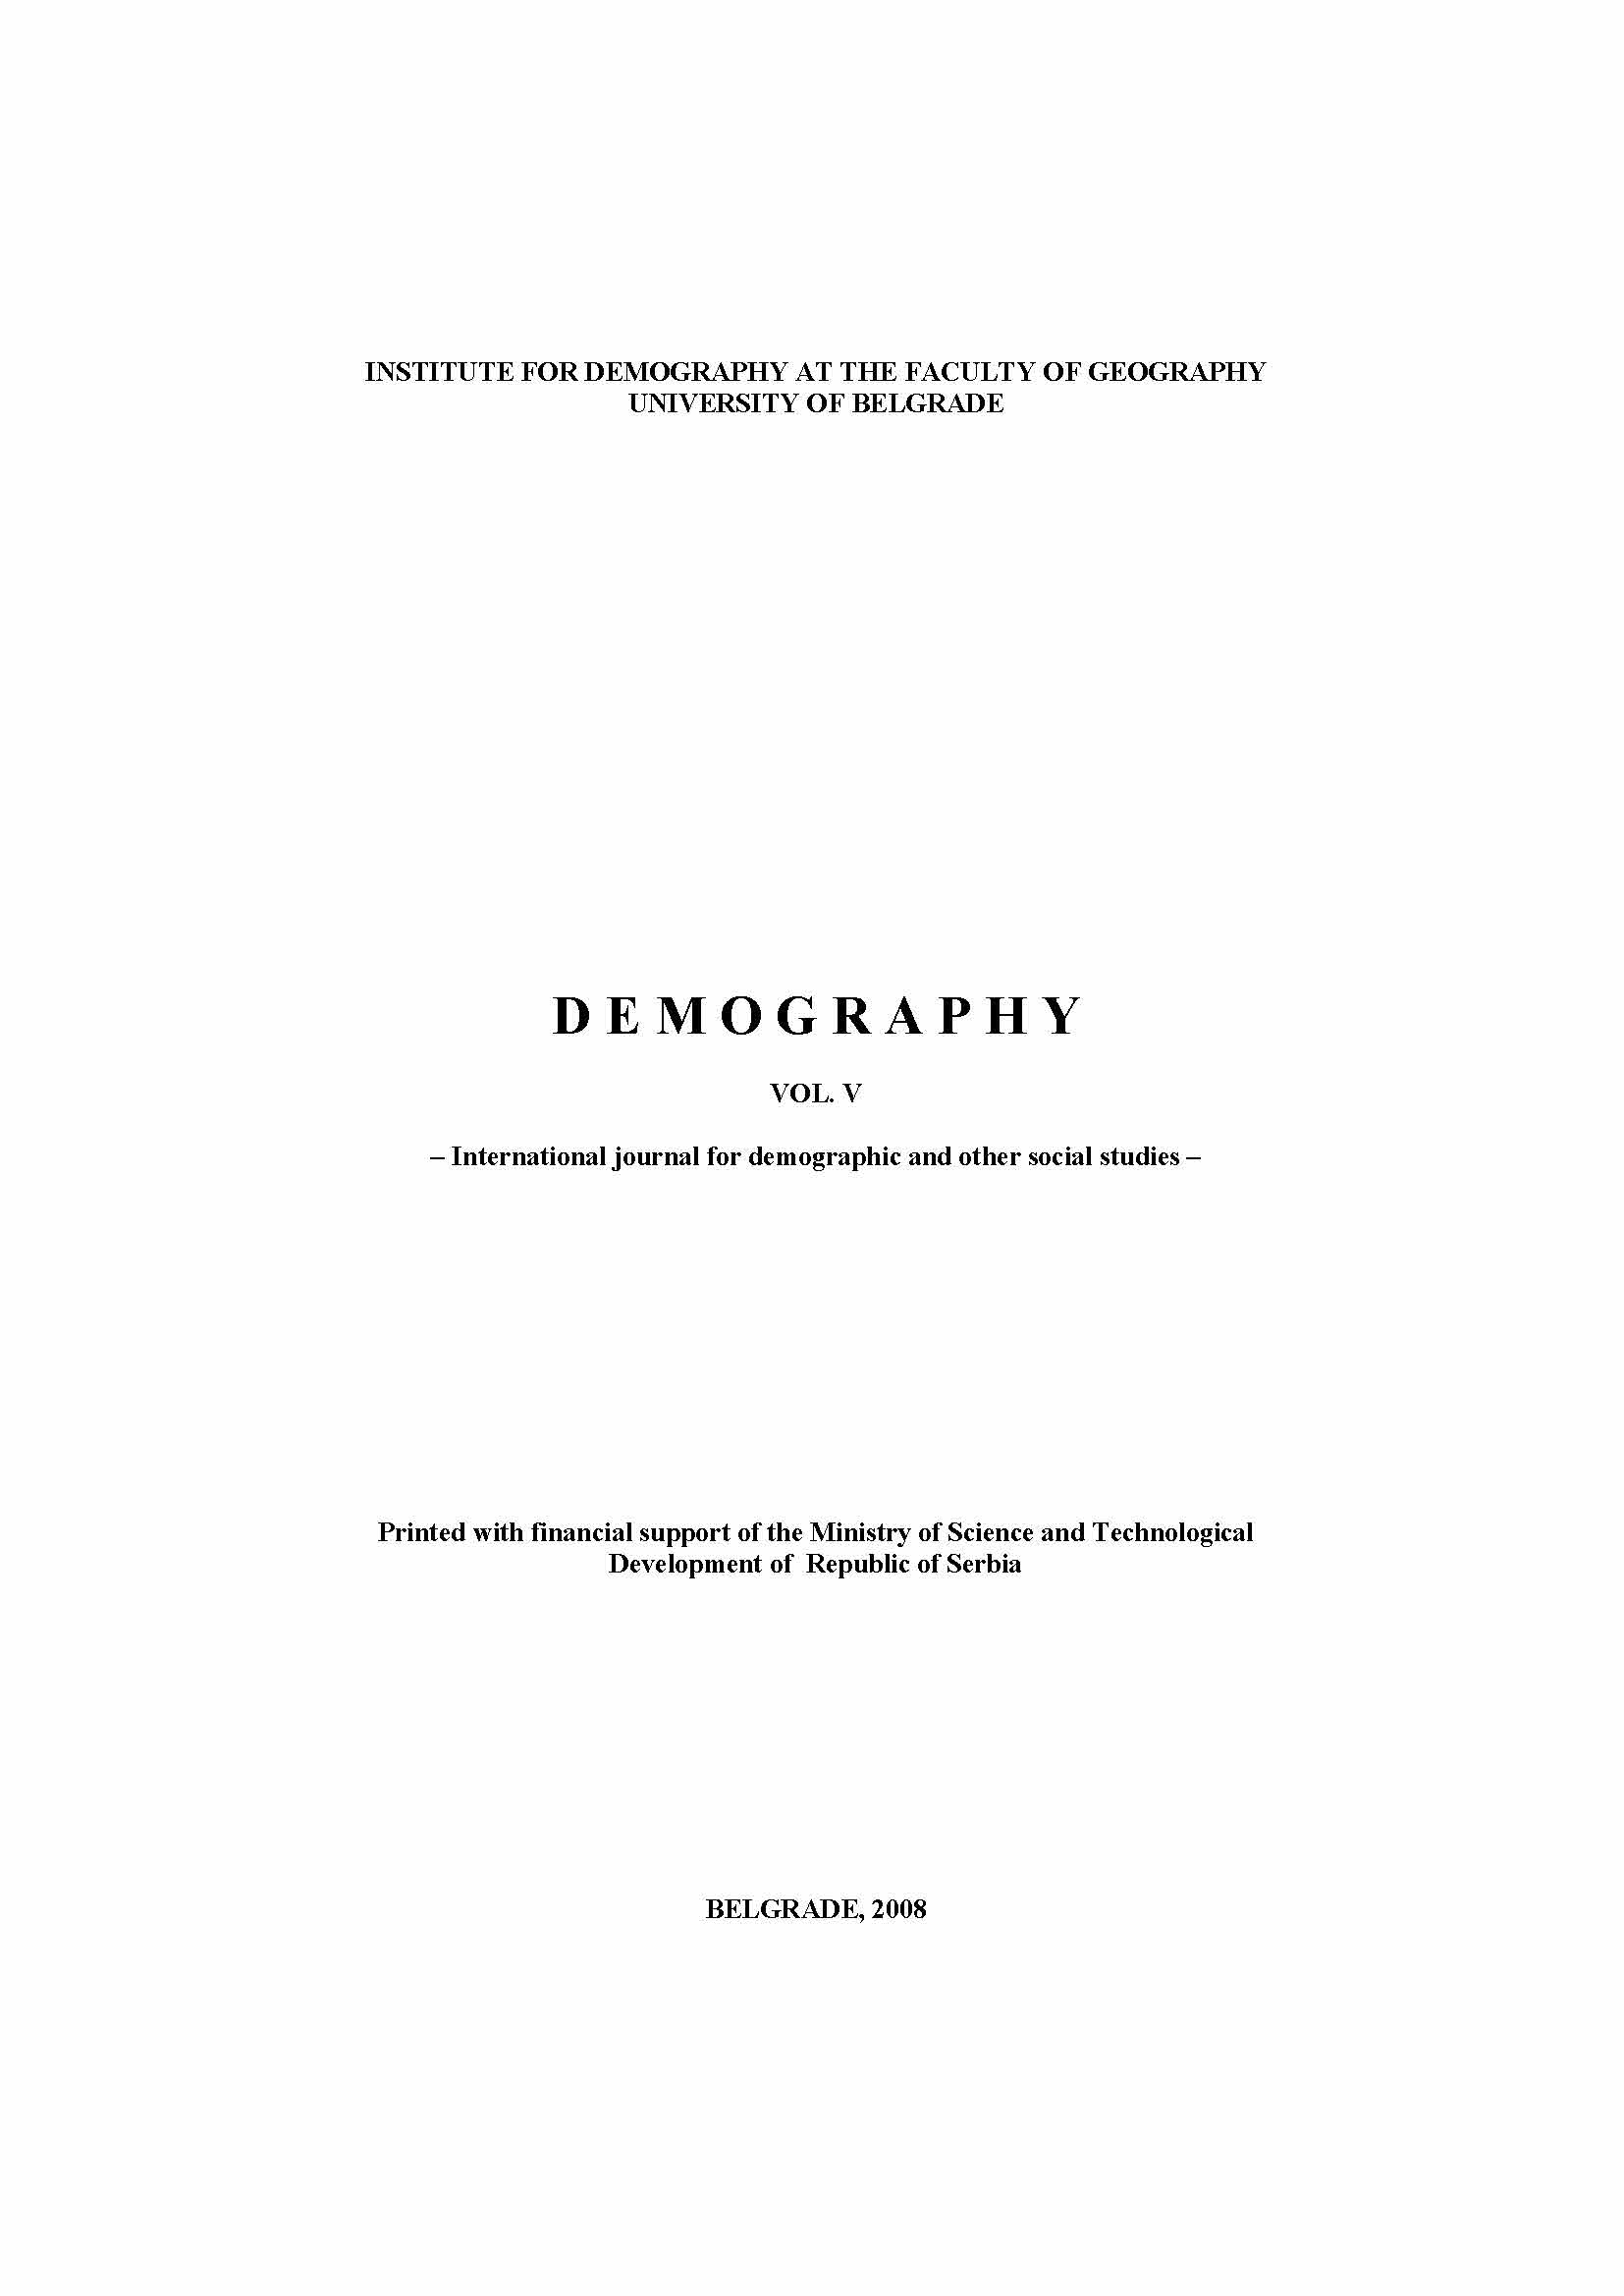 Elementary Characteristics of Demography in the Municipality of Pecinci Cover Image